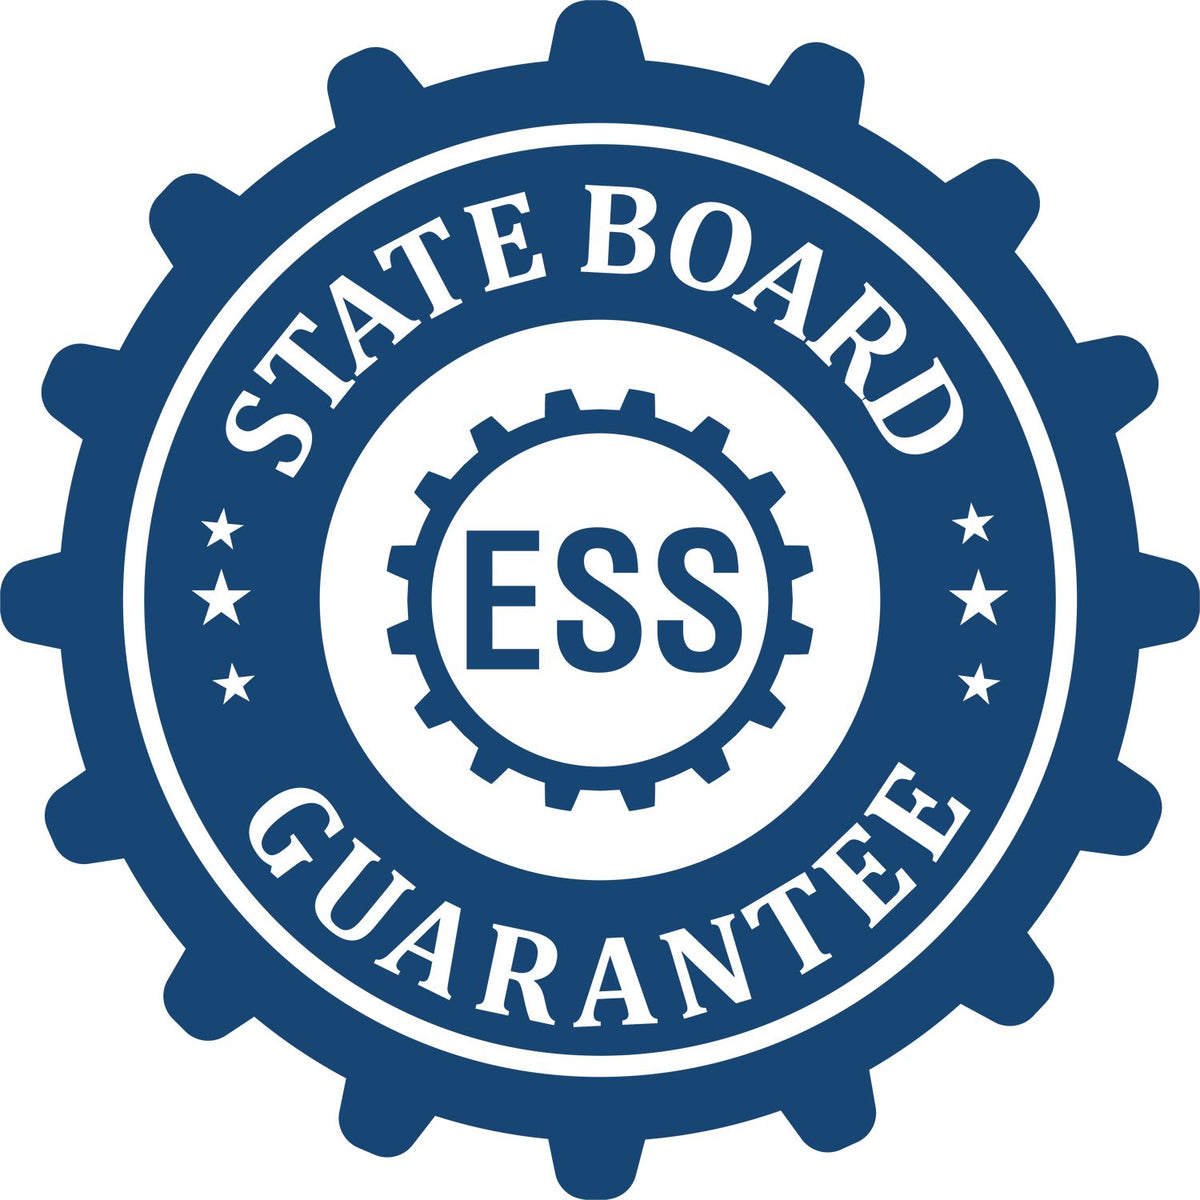 An emblem in a gear shape illustrating a state board guarantee for the Oklahoma Geologist Desk Seal